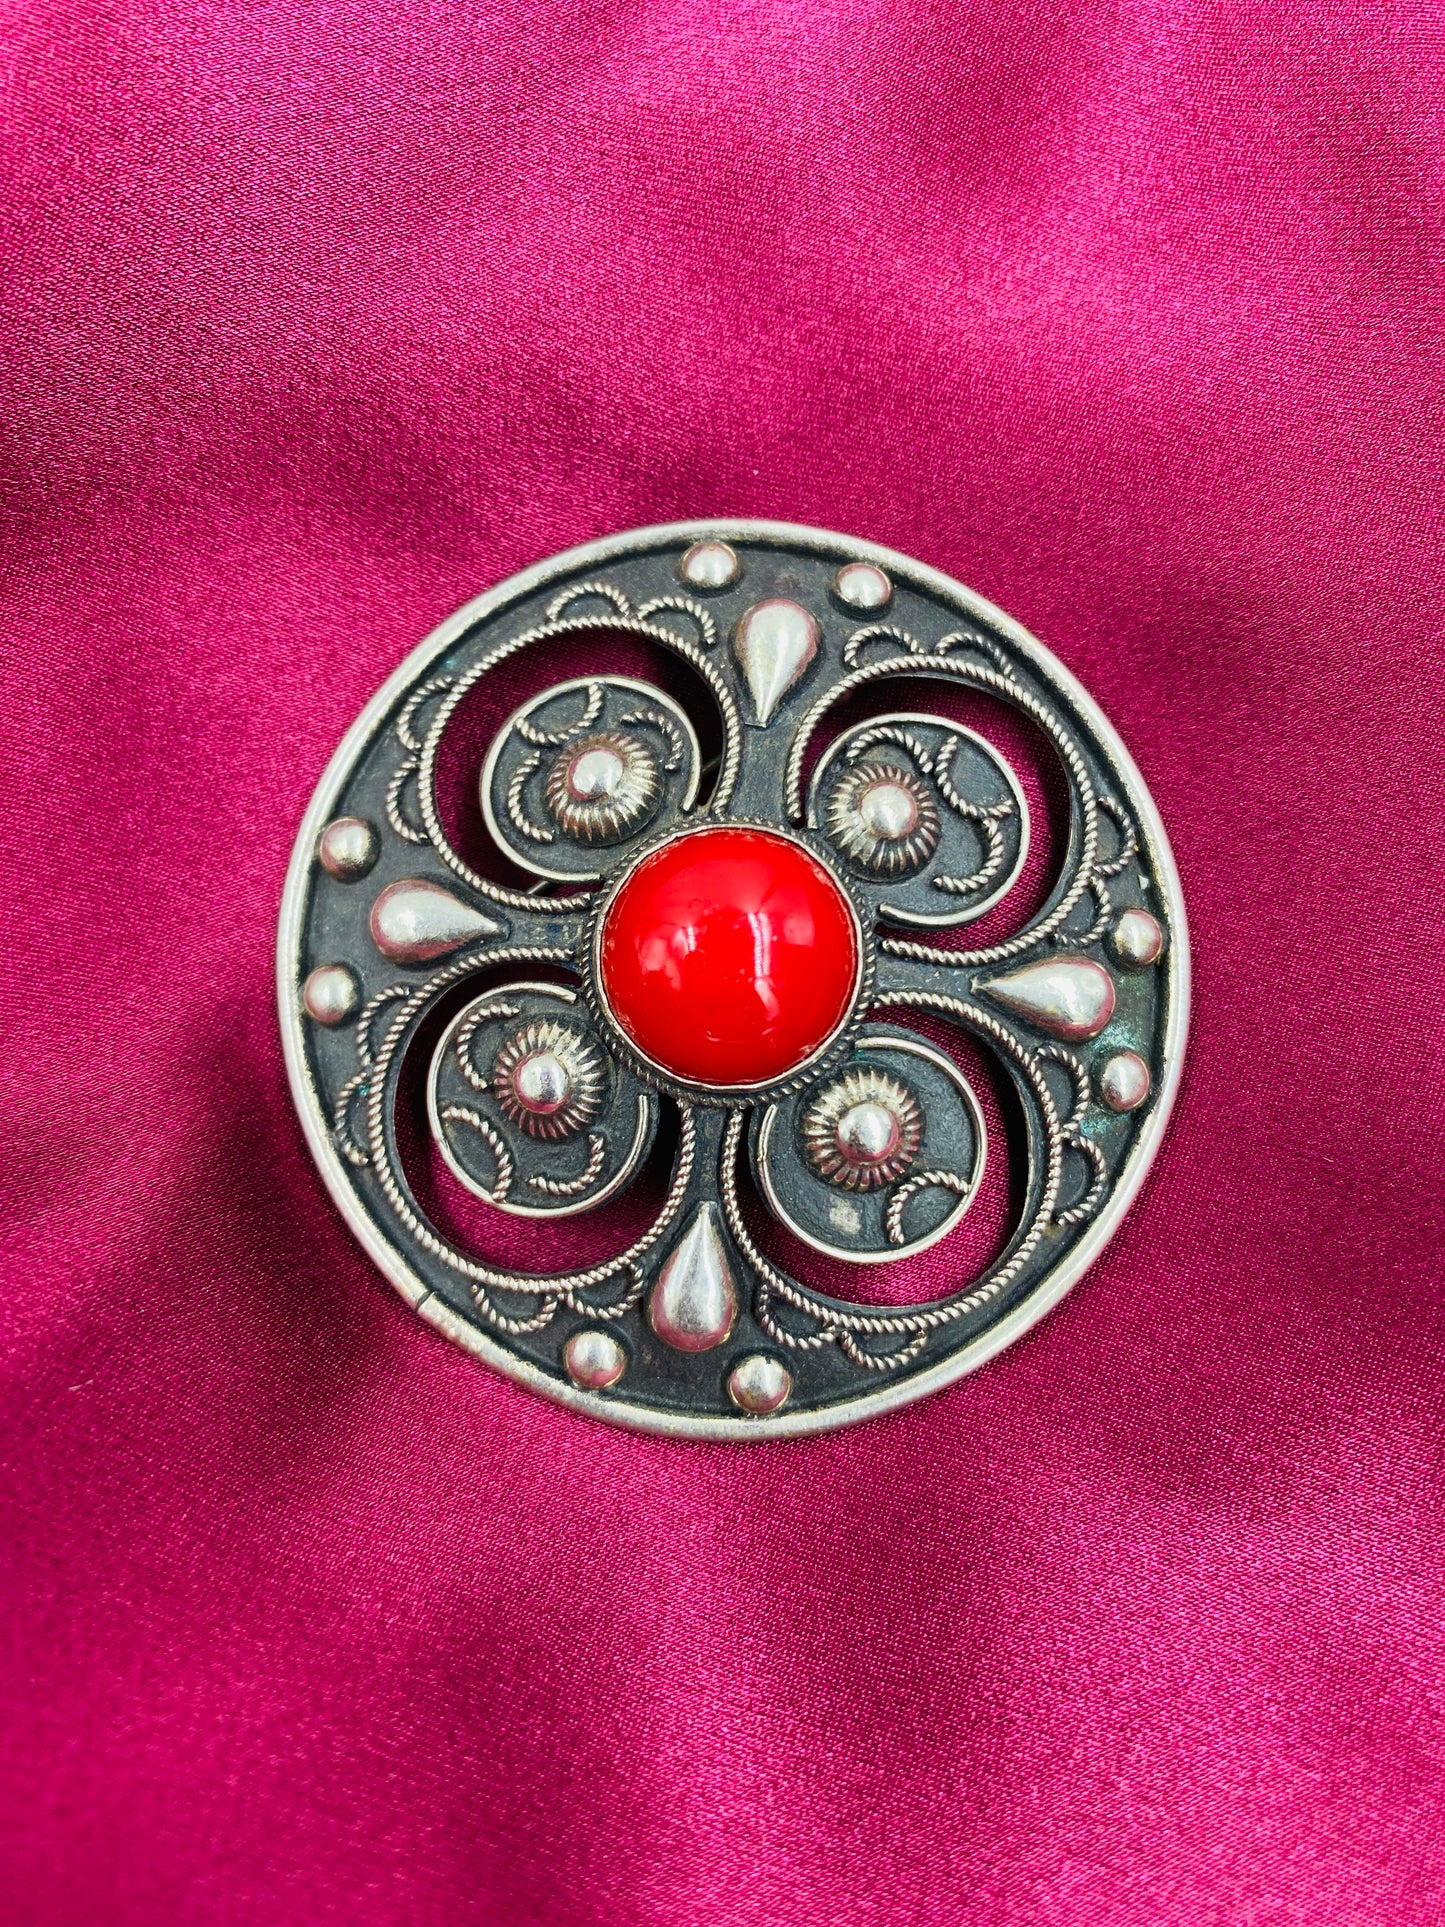 Vintage Sterling Silver Round Brooch with Red Glass Cabochon